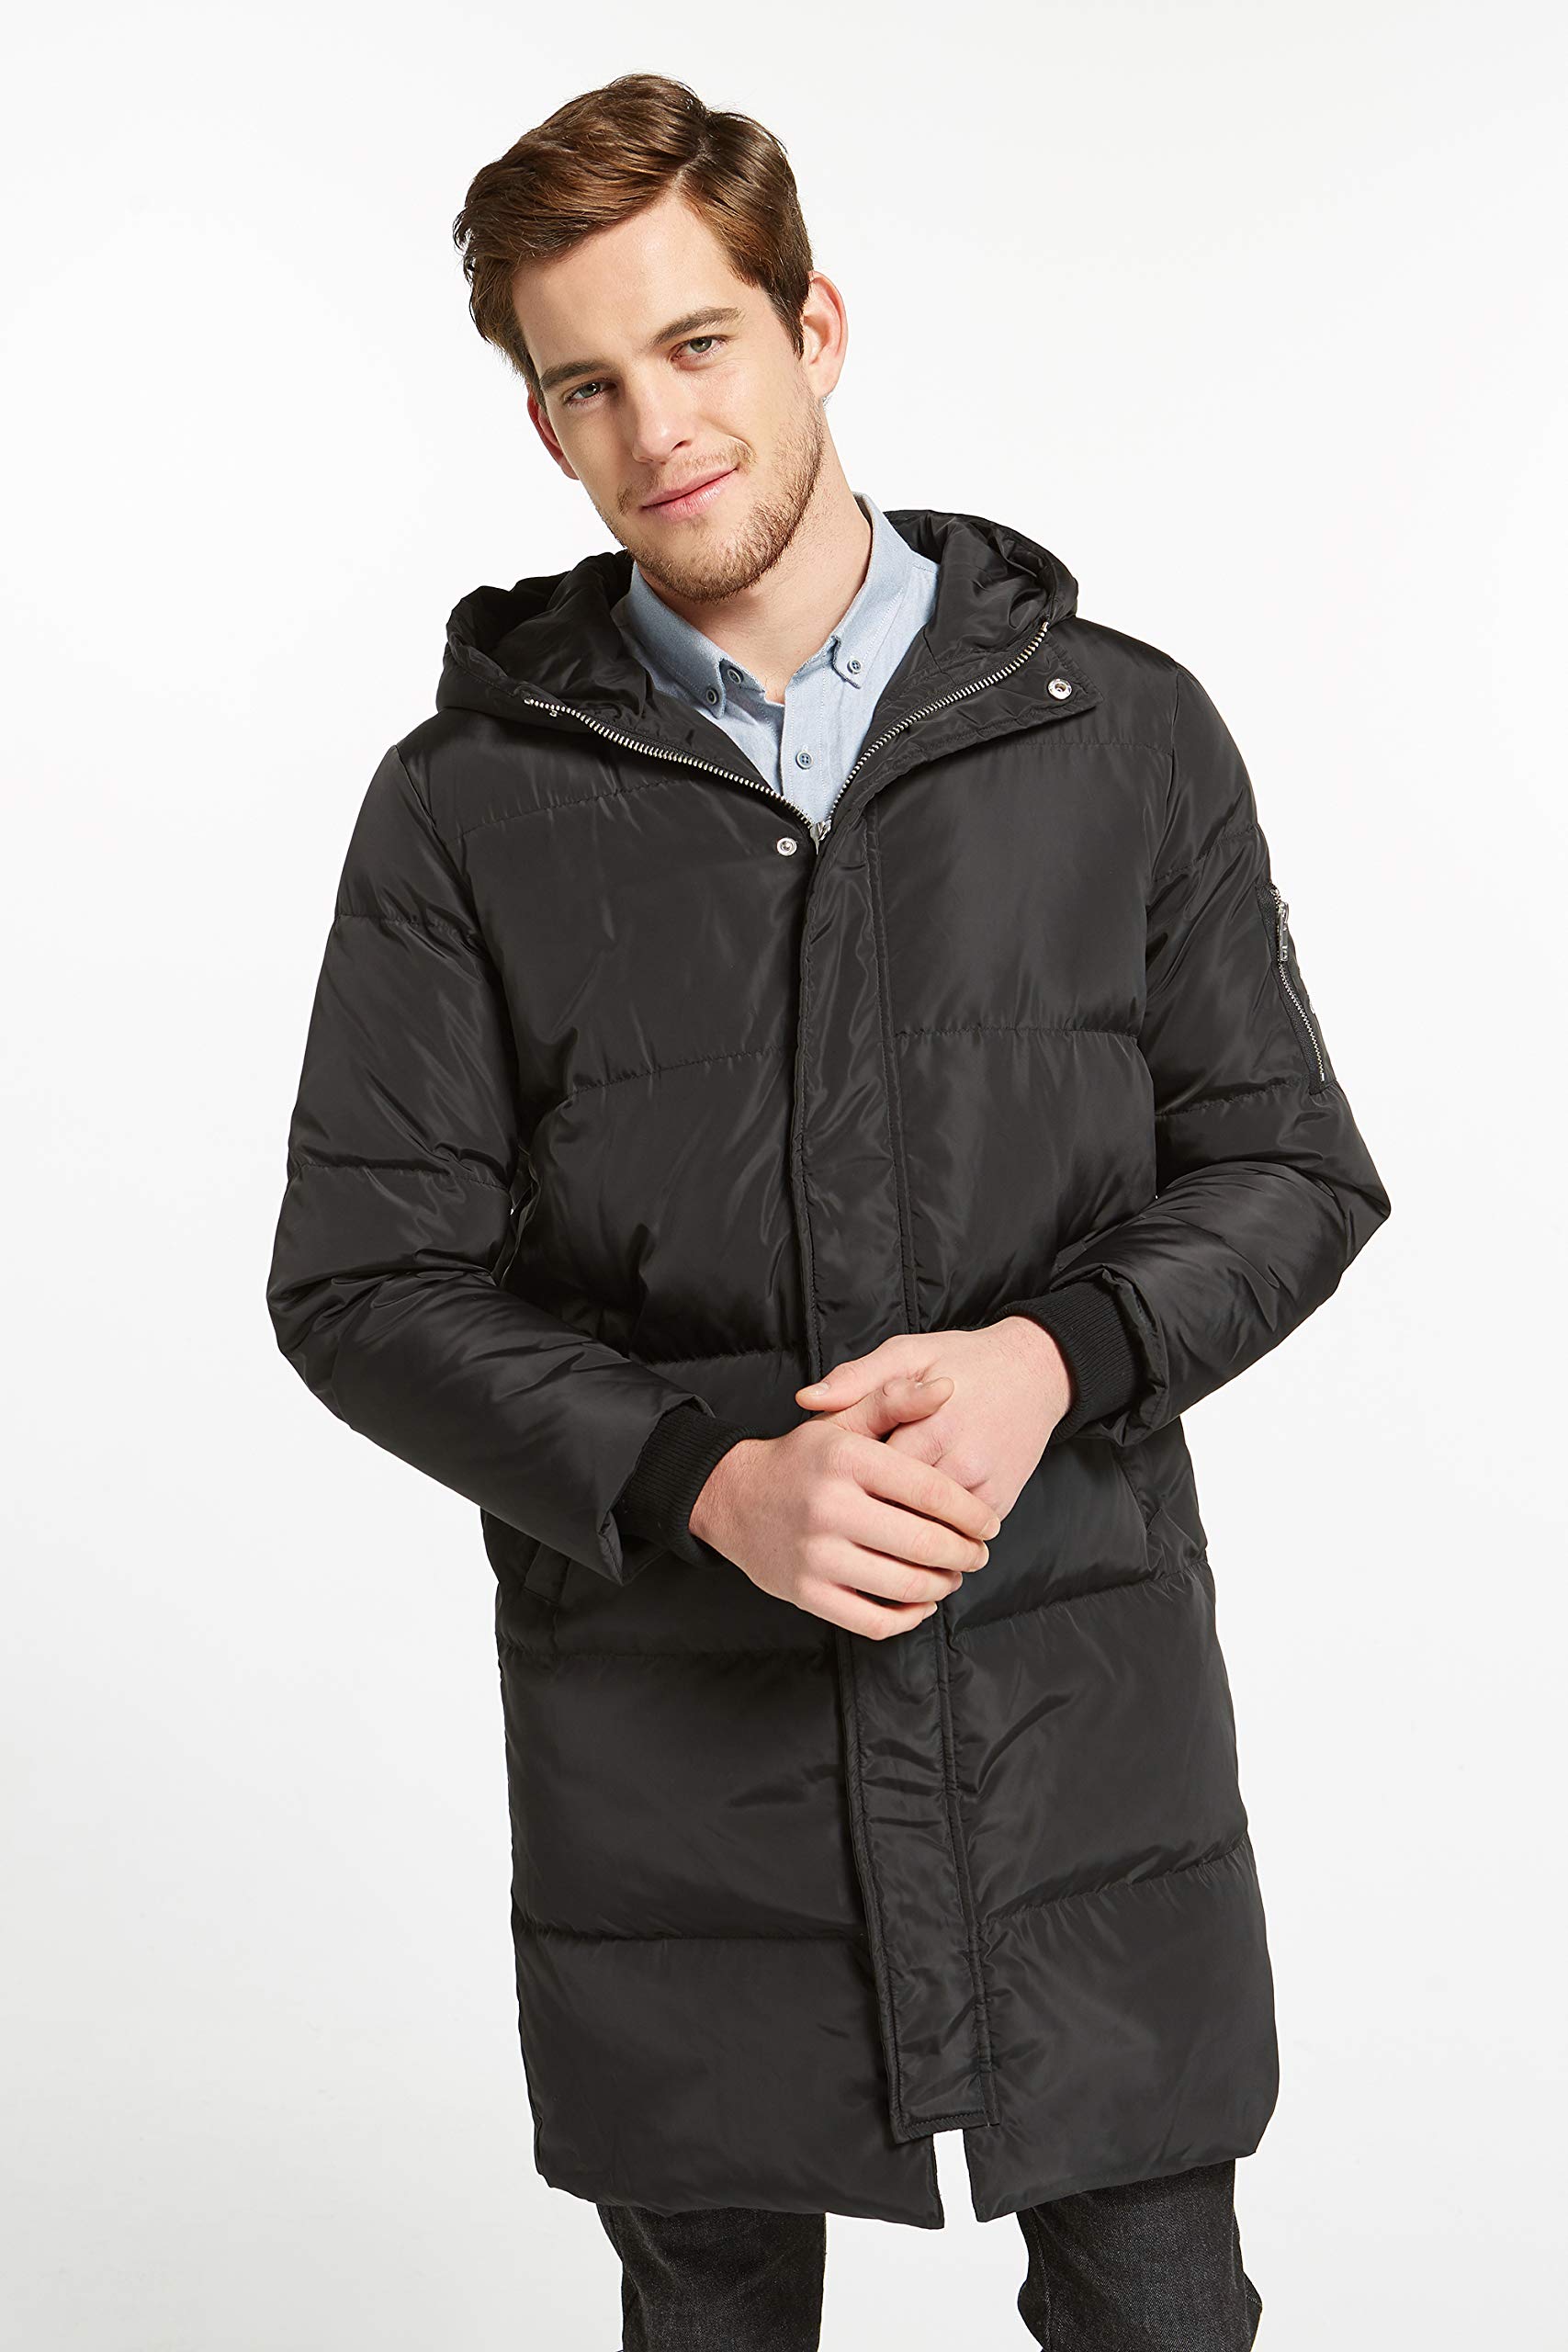 Orolay Men’s Thickened Down Jacket Winter Warm Down Coat